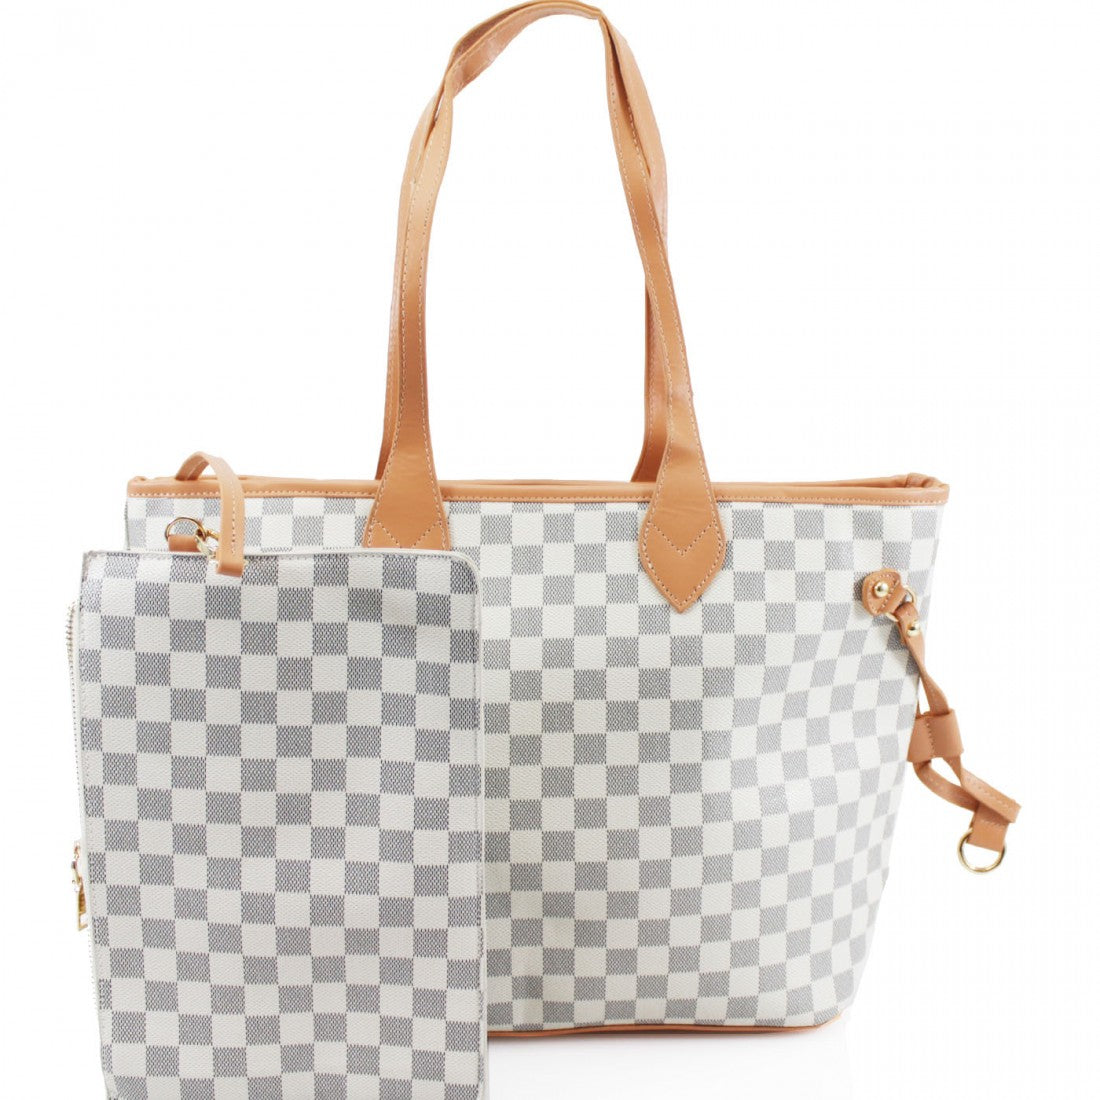 Richports Checkered Tote Shoulder Bag with Inner Pouch - PU Vegan Leather White, Women's, Size: Medium, Black